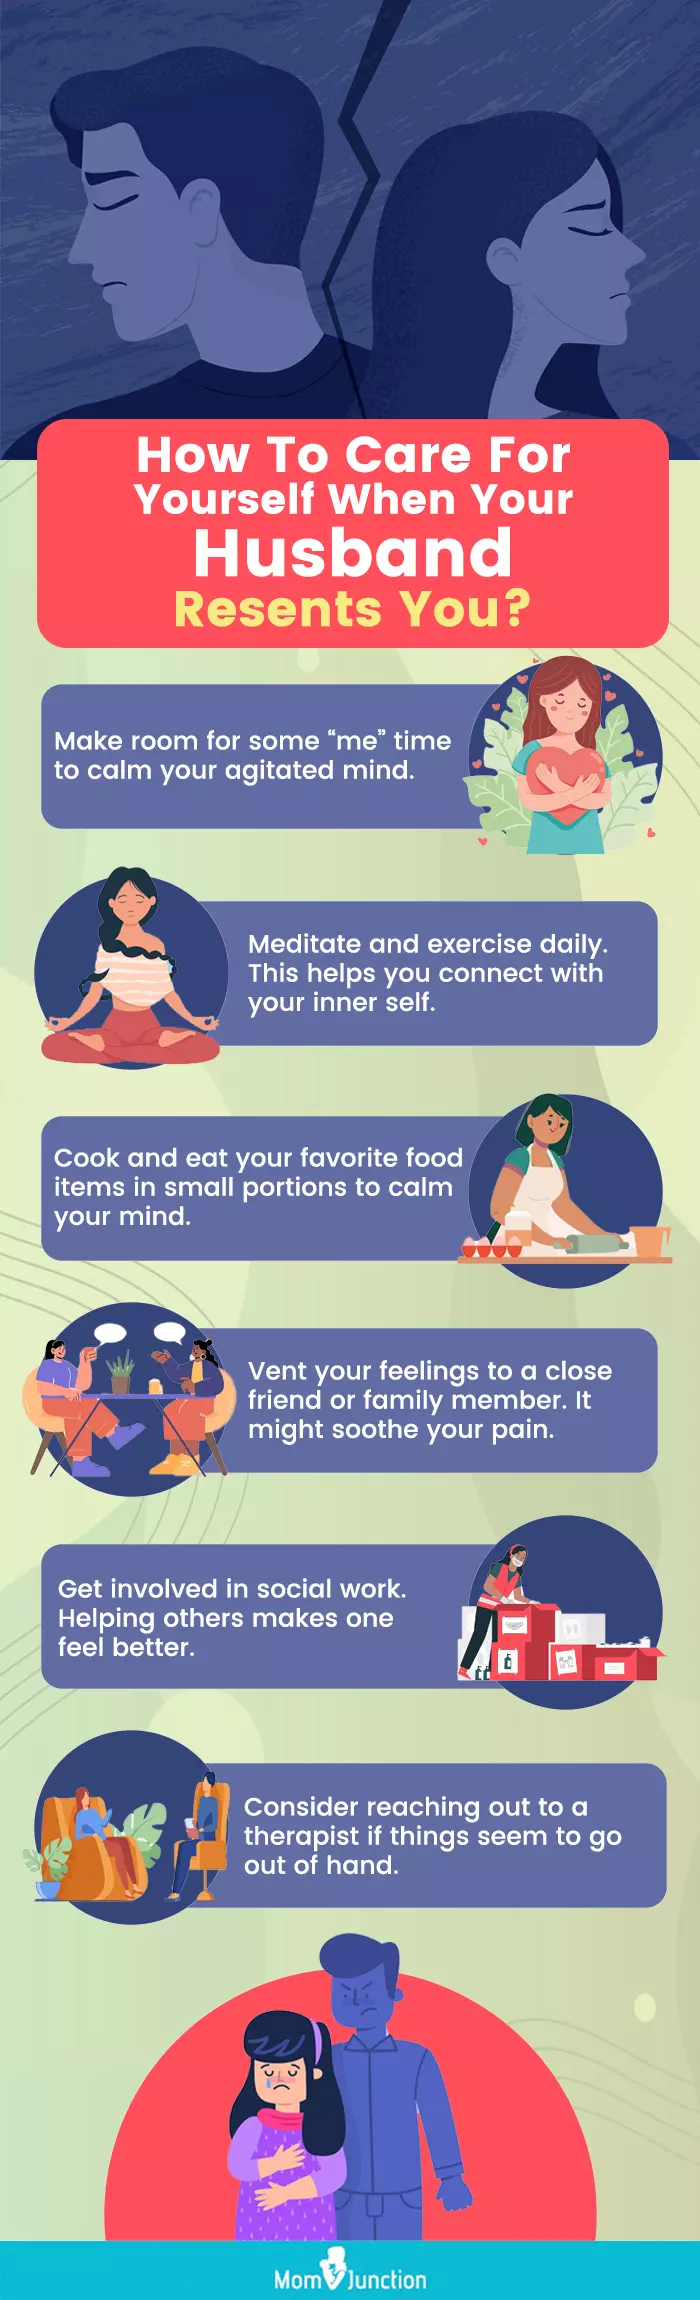 caring for yourself during the tough phase (infographic)